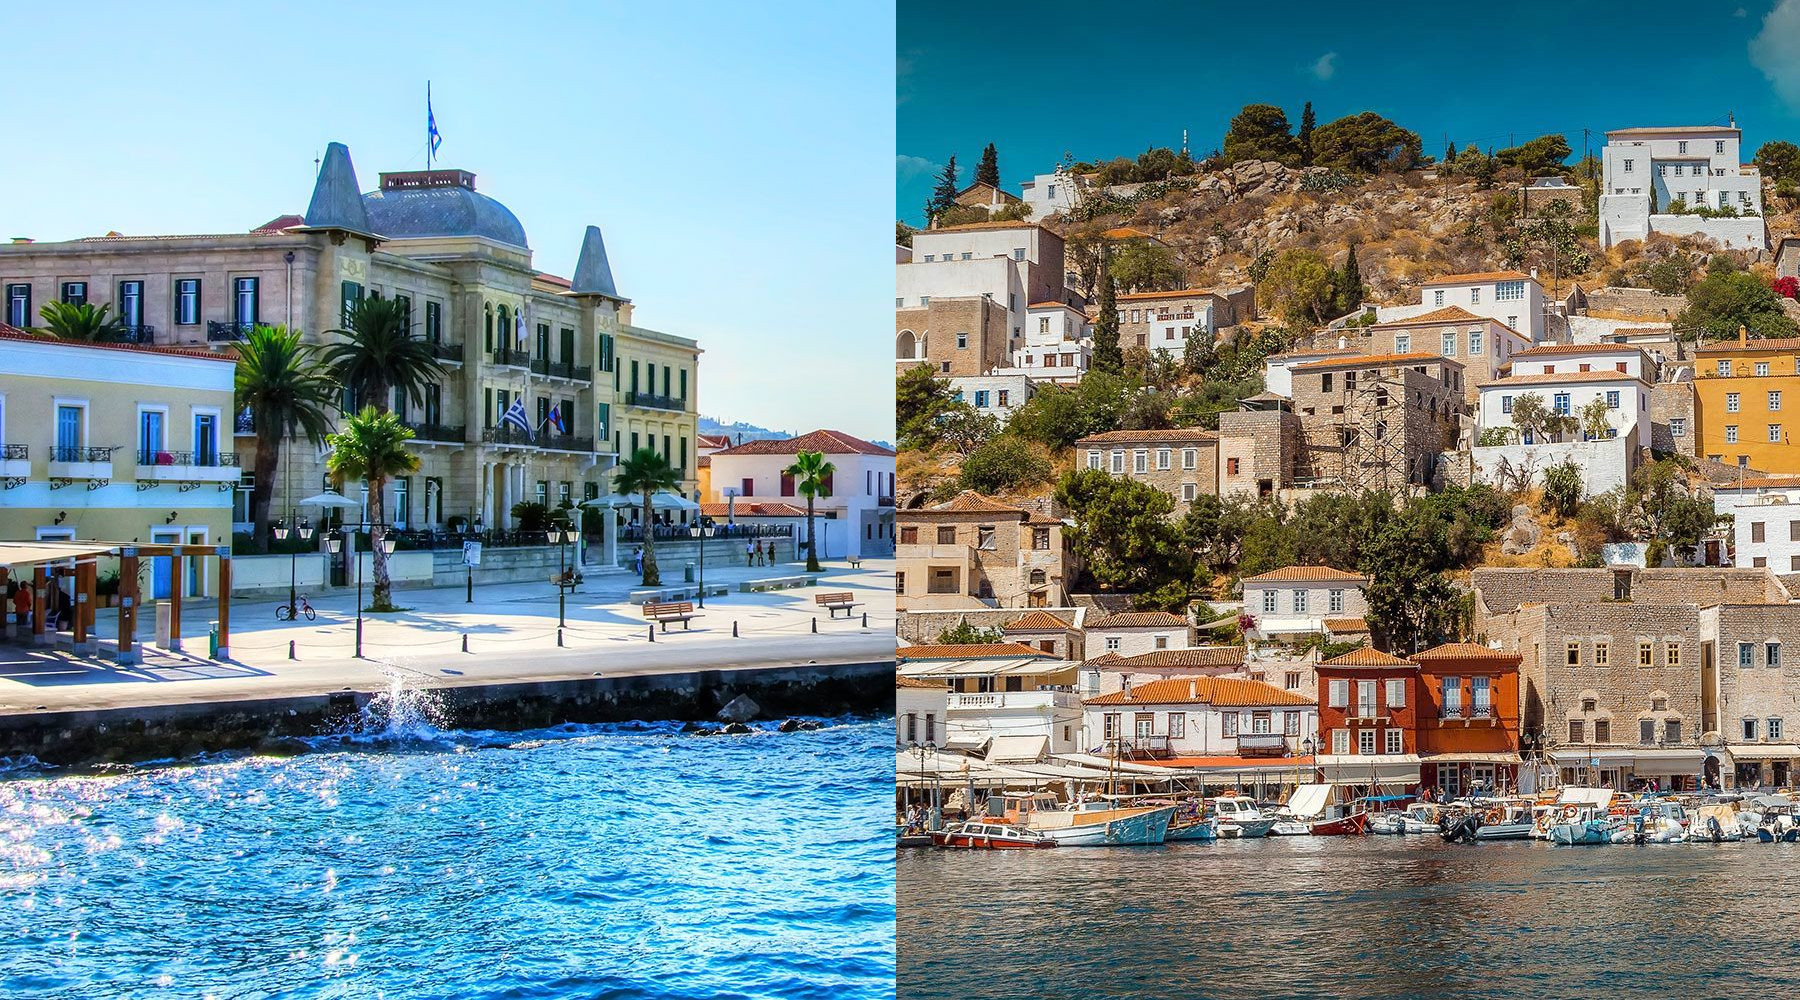 Hydra or Spetses